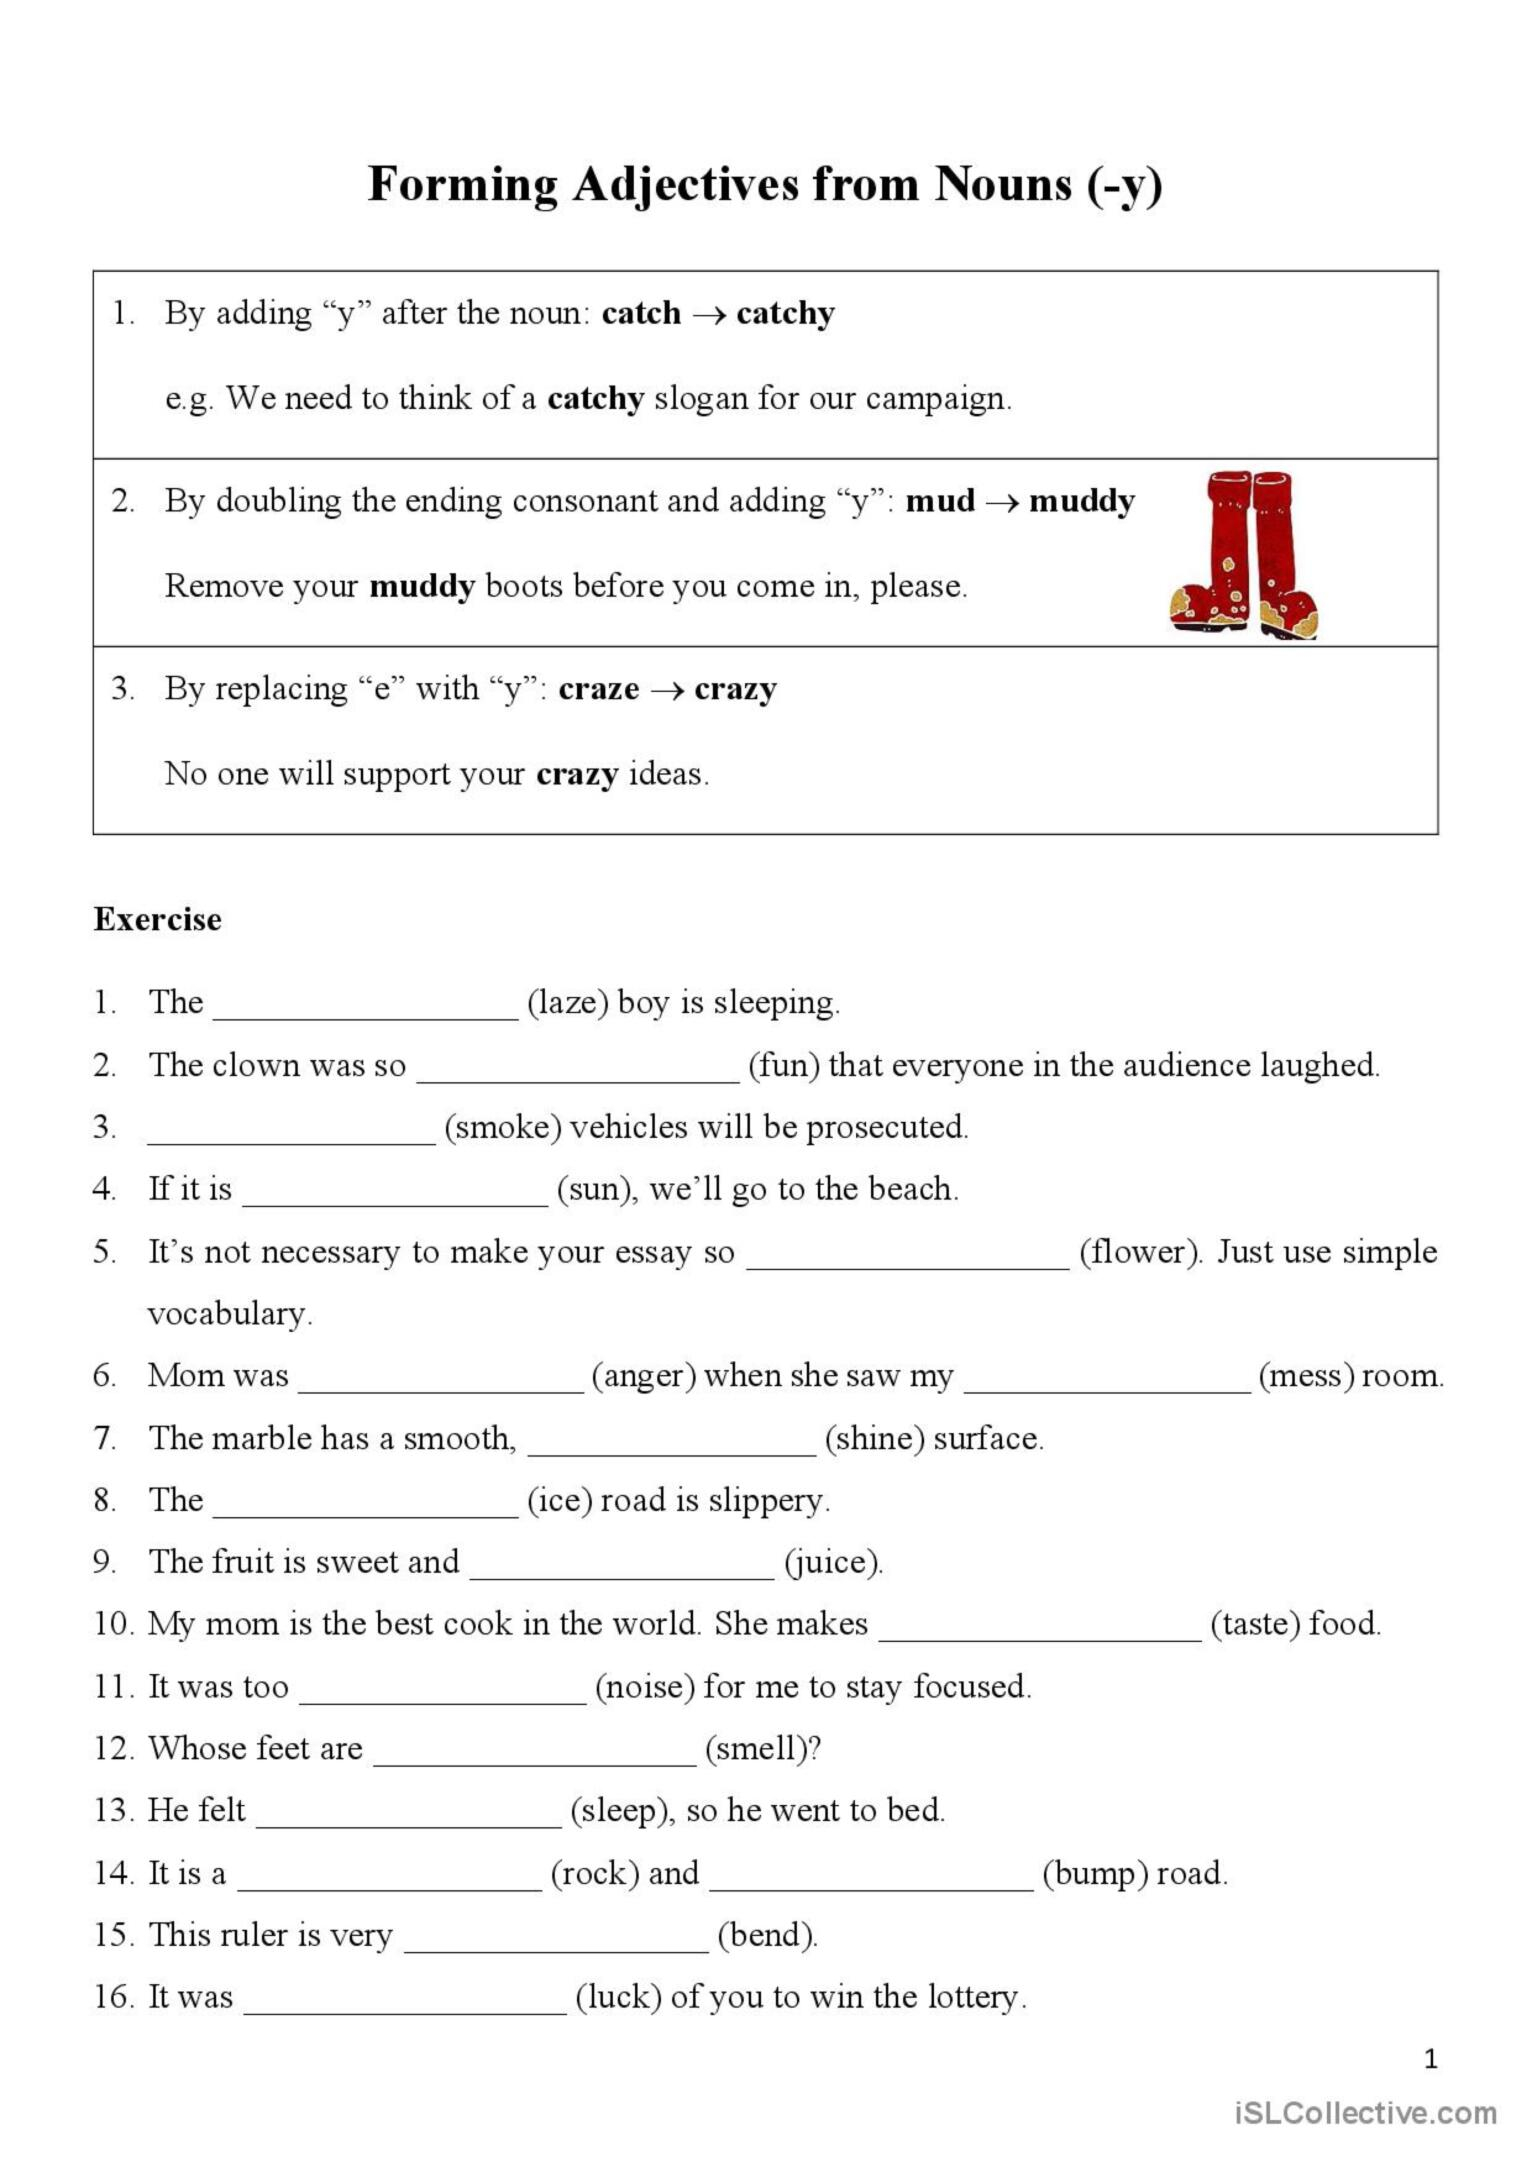 Forming Adjectives From Nouns English ESL Worksheets Pdf Doc